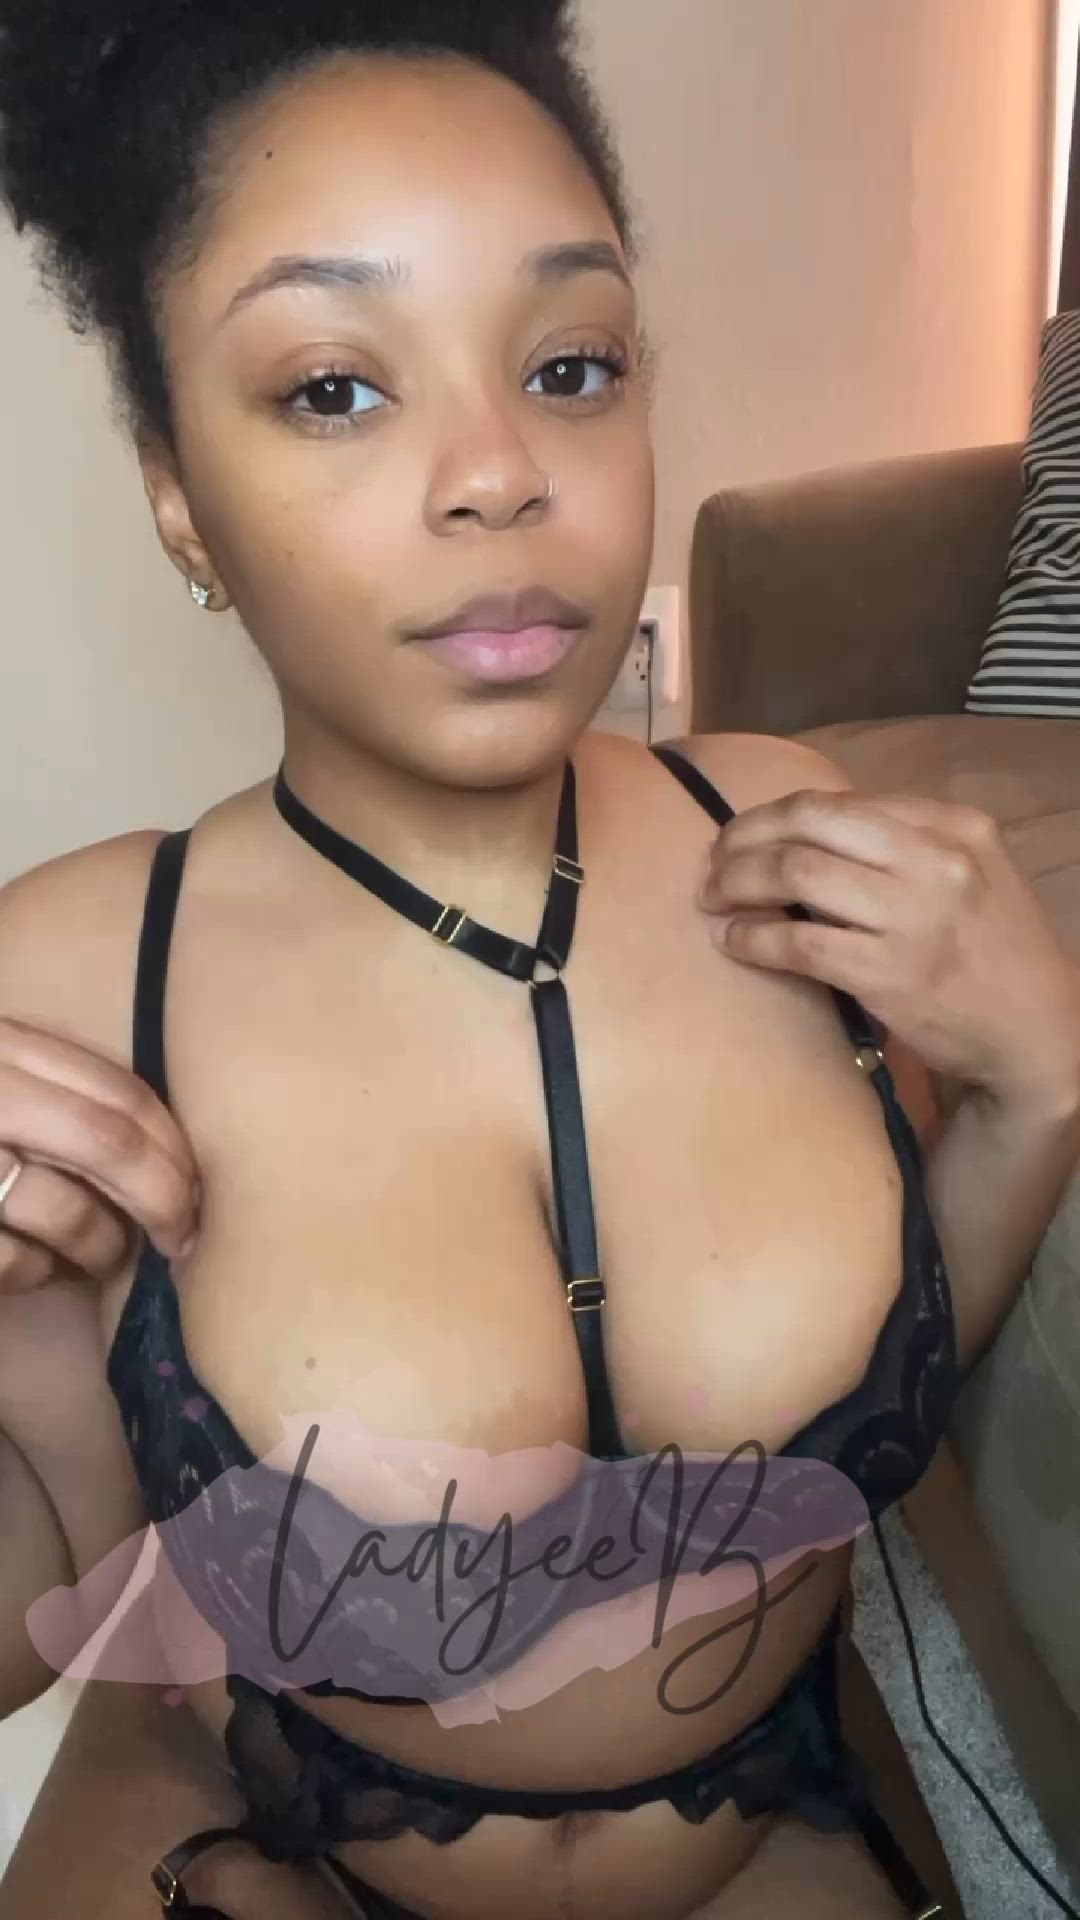 Big Tits porn video with onlyfans model Ladyeeb <strong>@ladyeeb</strong>